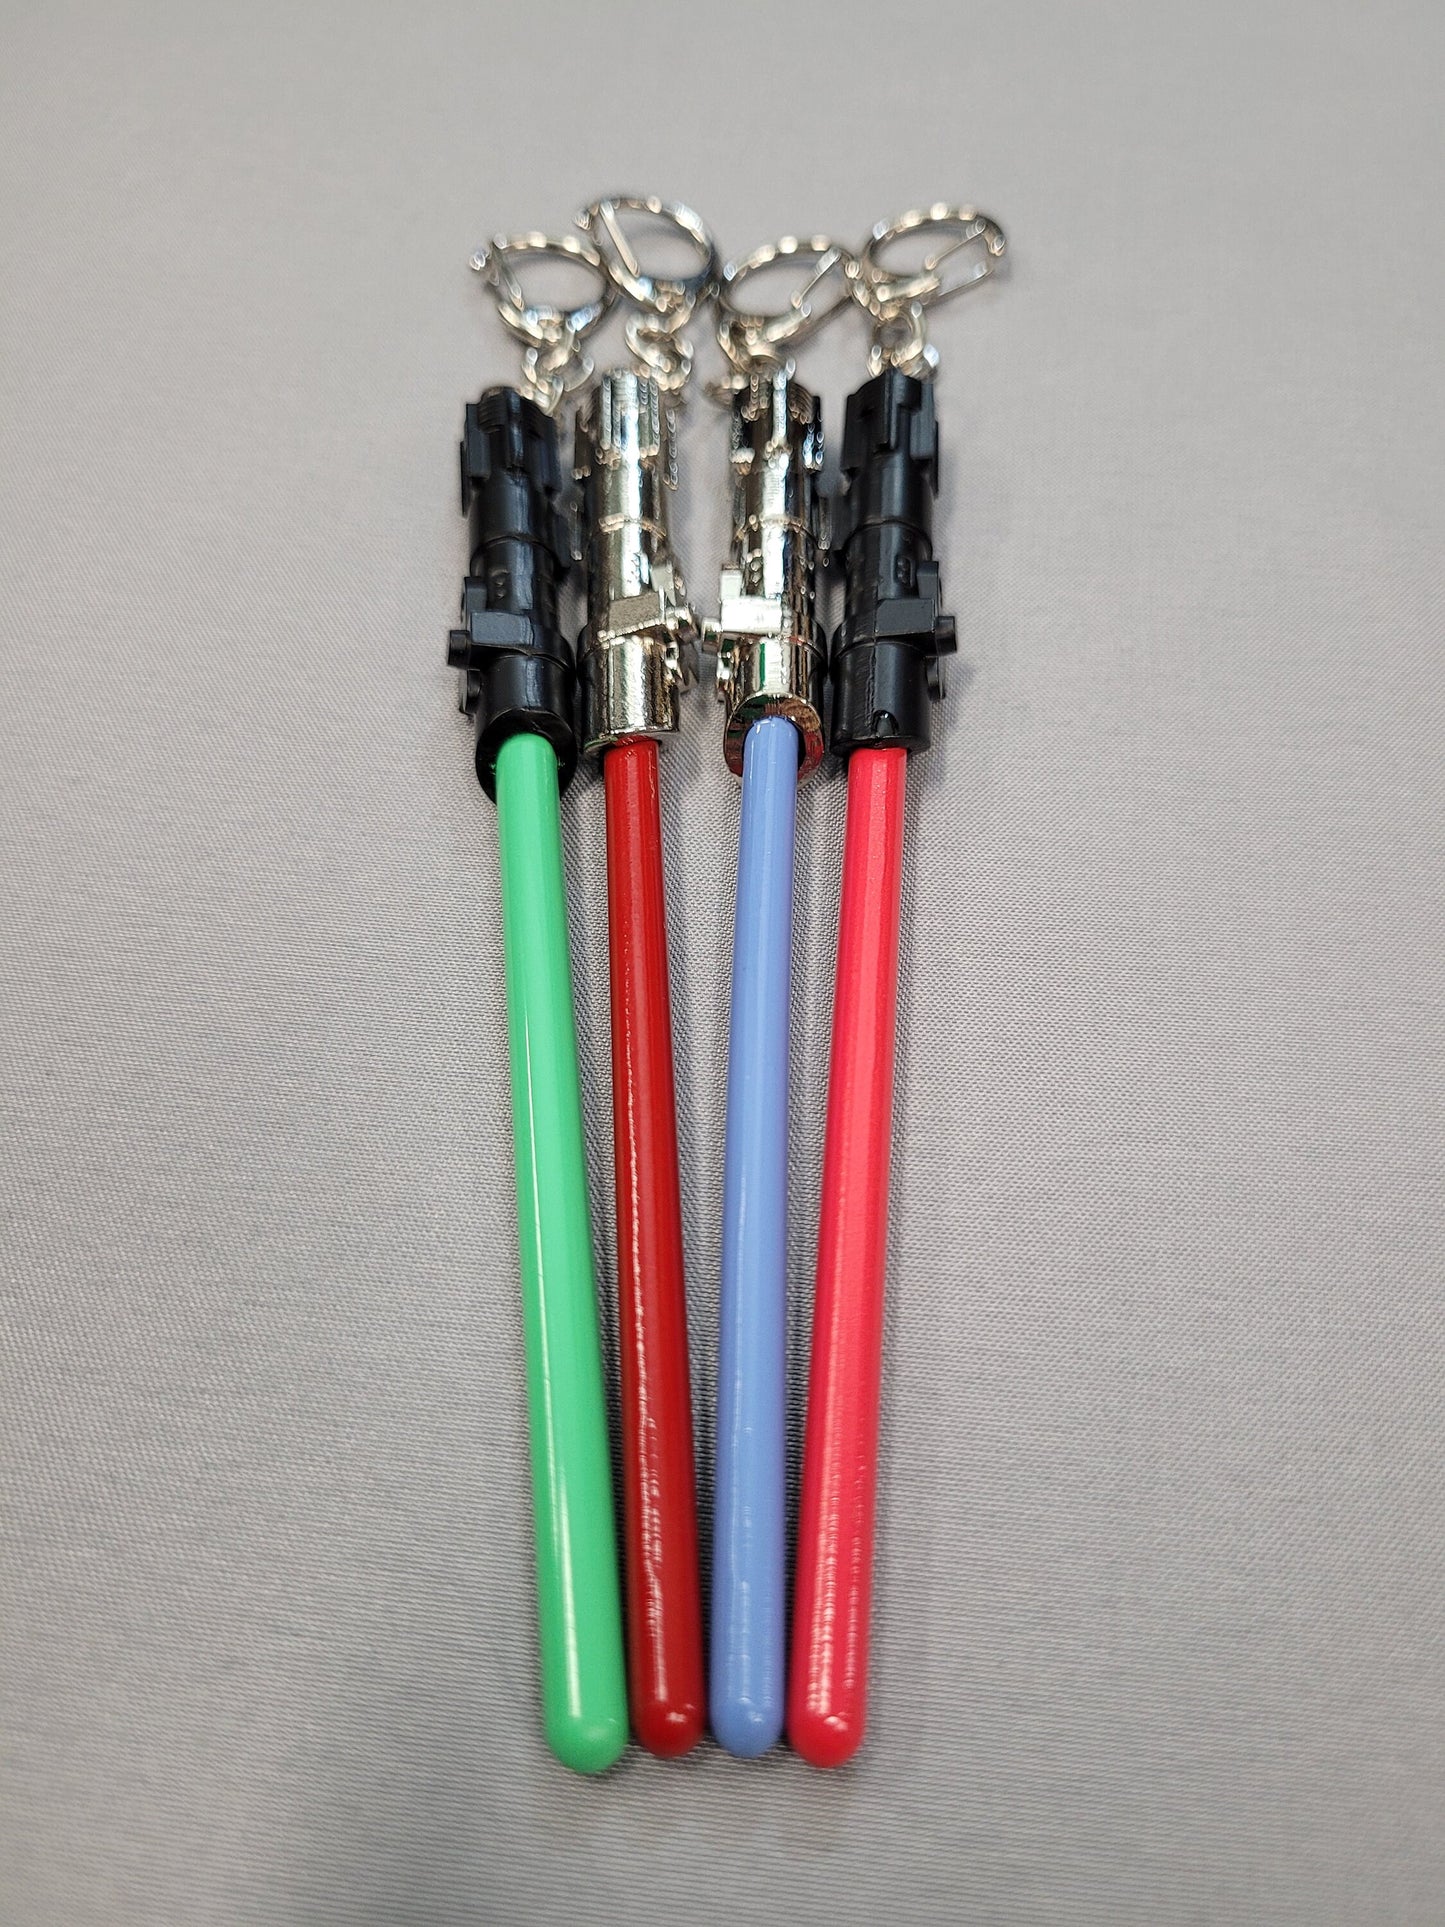 Lightsaber Key Chain Red Green Blue Black Silver Solid Jedi Sith Metal Keychain Star Wars Gift Bossaber